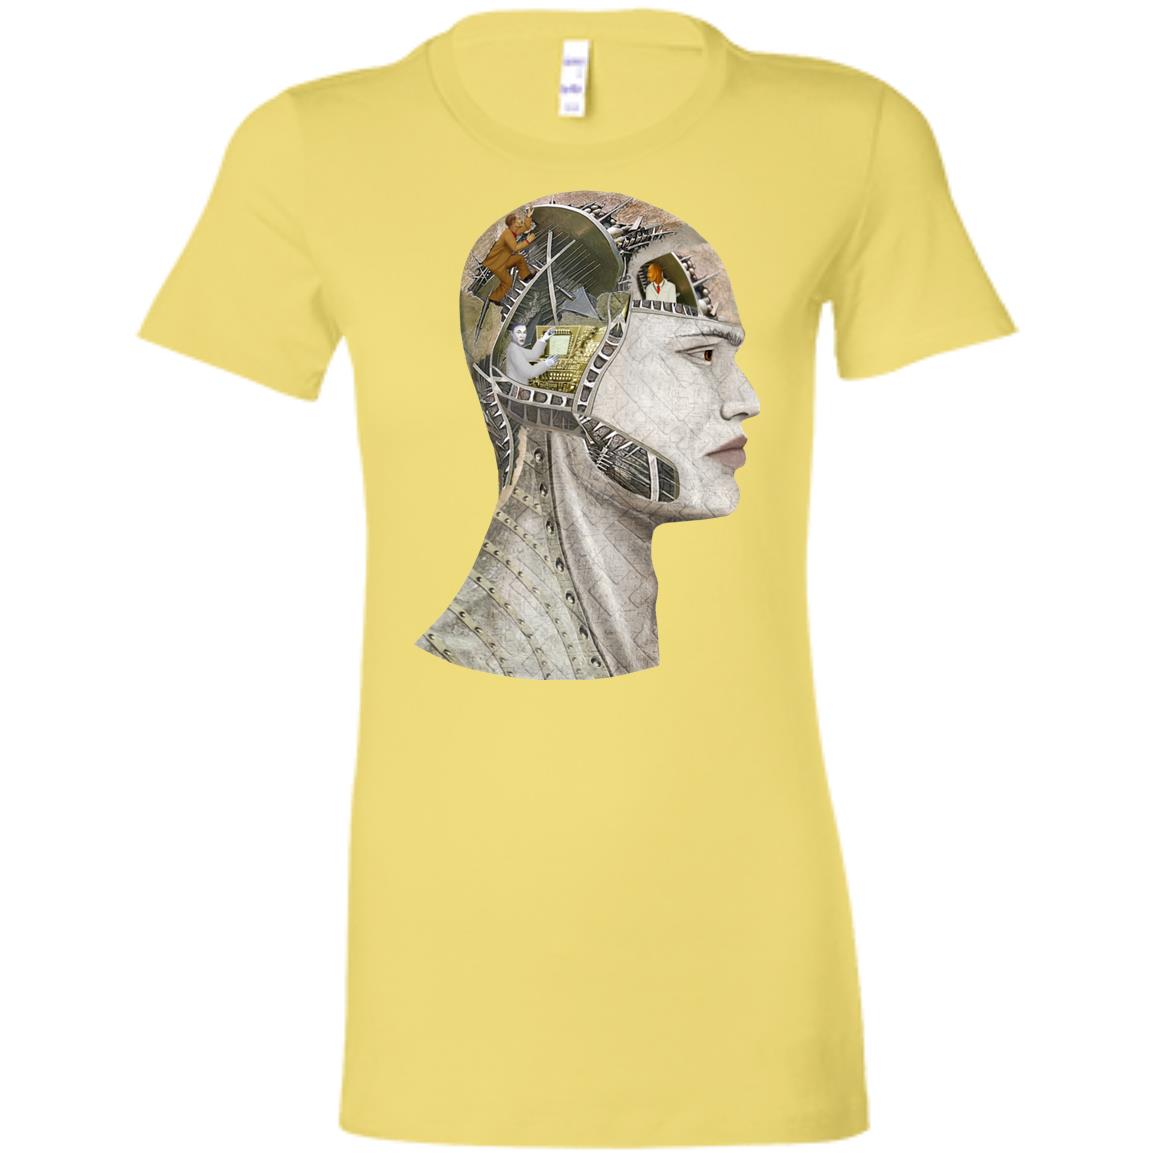 Who's Driving - Women's Fitted T-Shirt